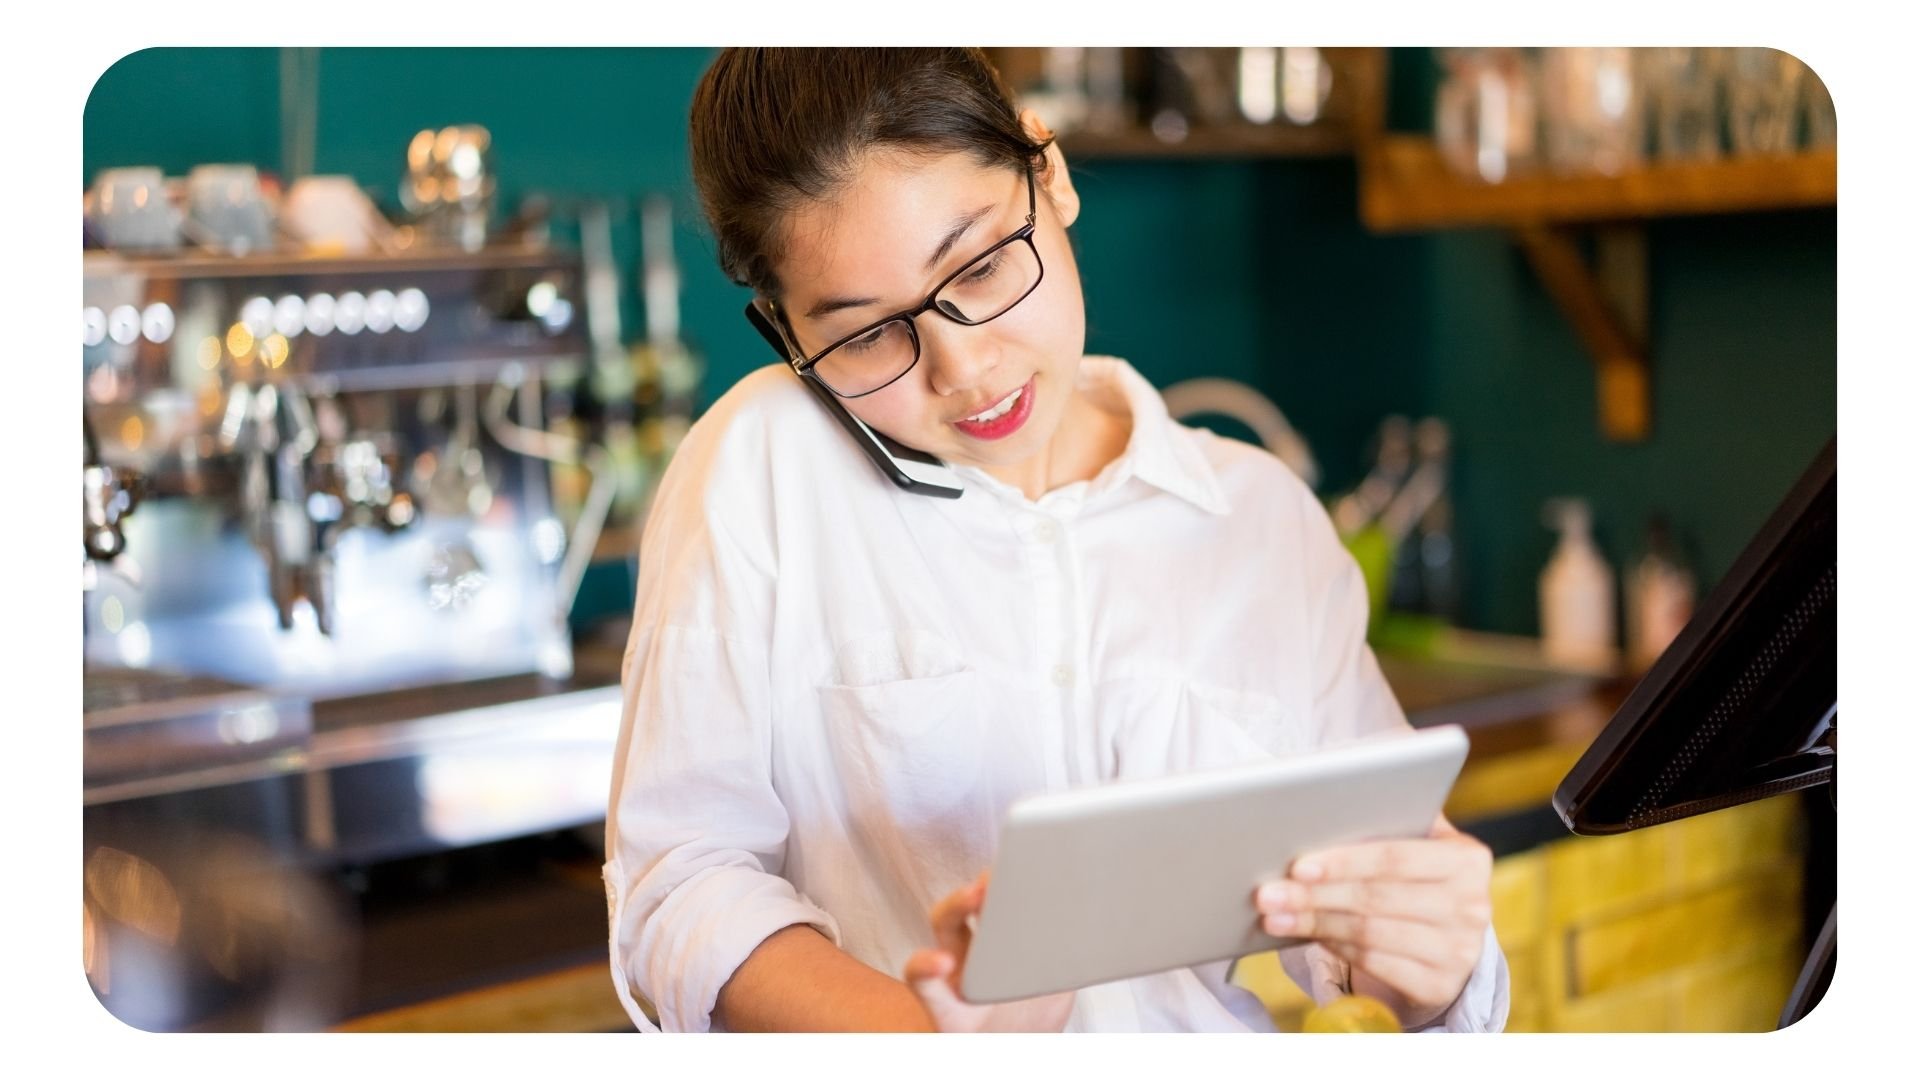 Restaurant manager using tablet device for work